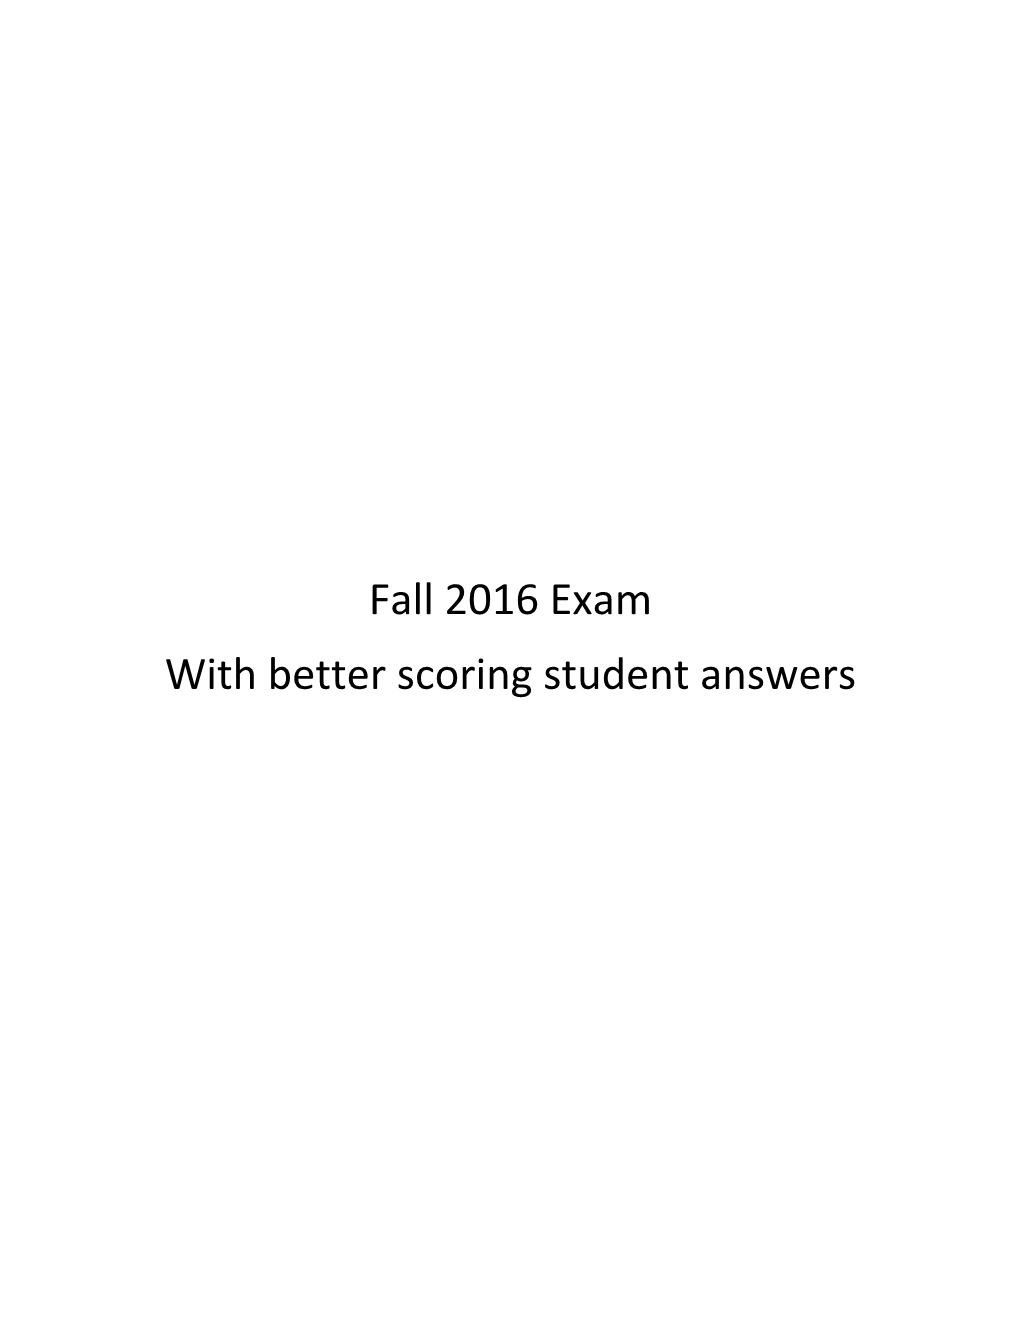 Fall 2016 Exam with Better Scoring Student Answers